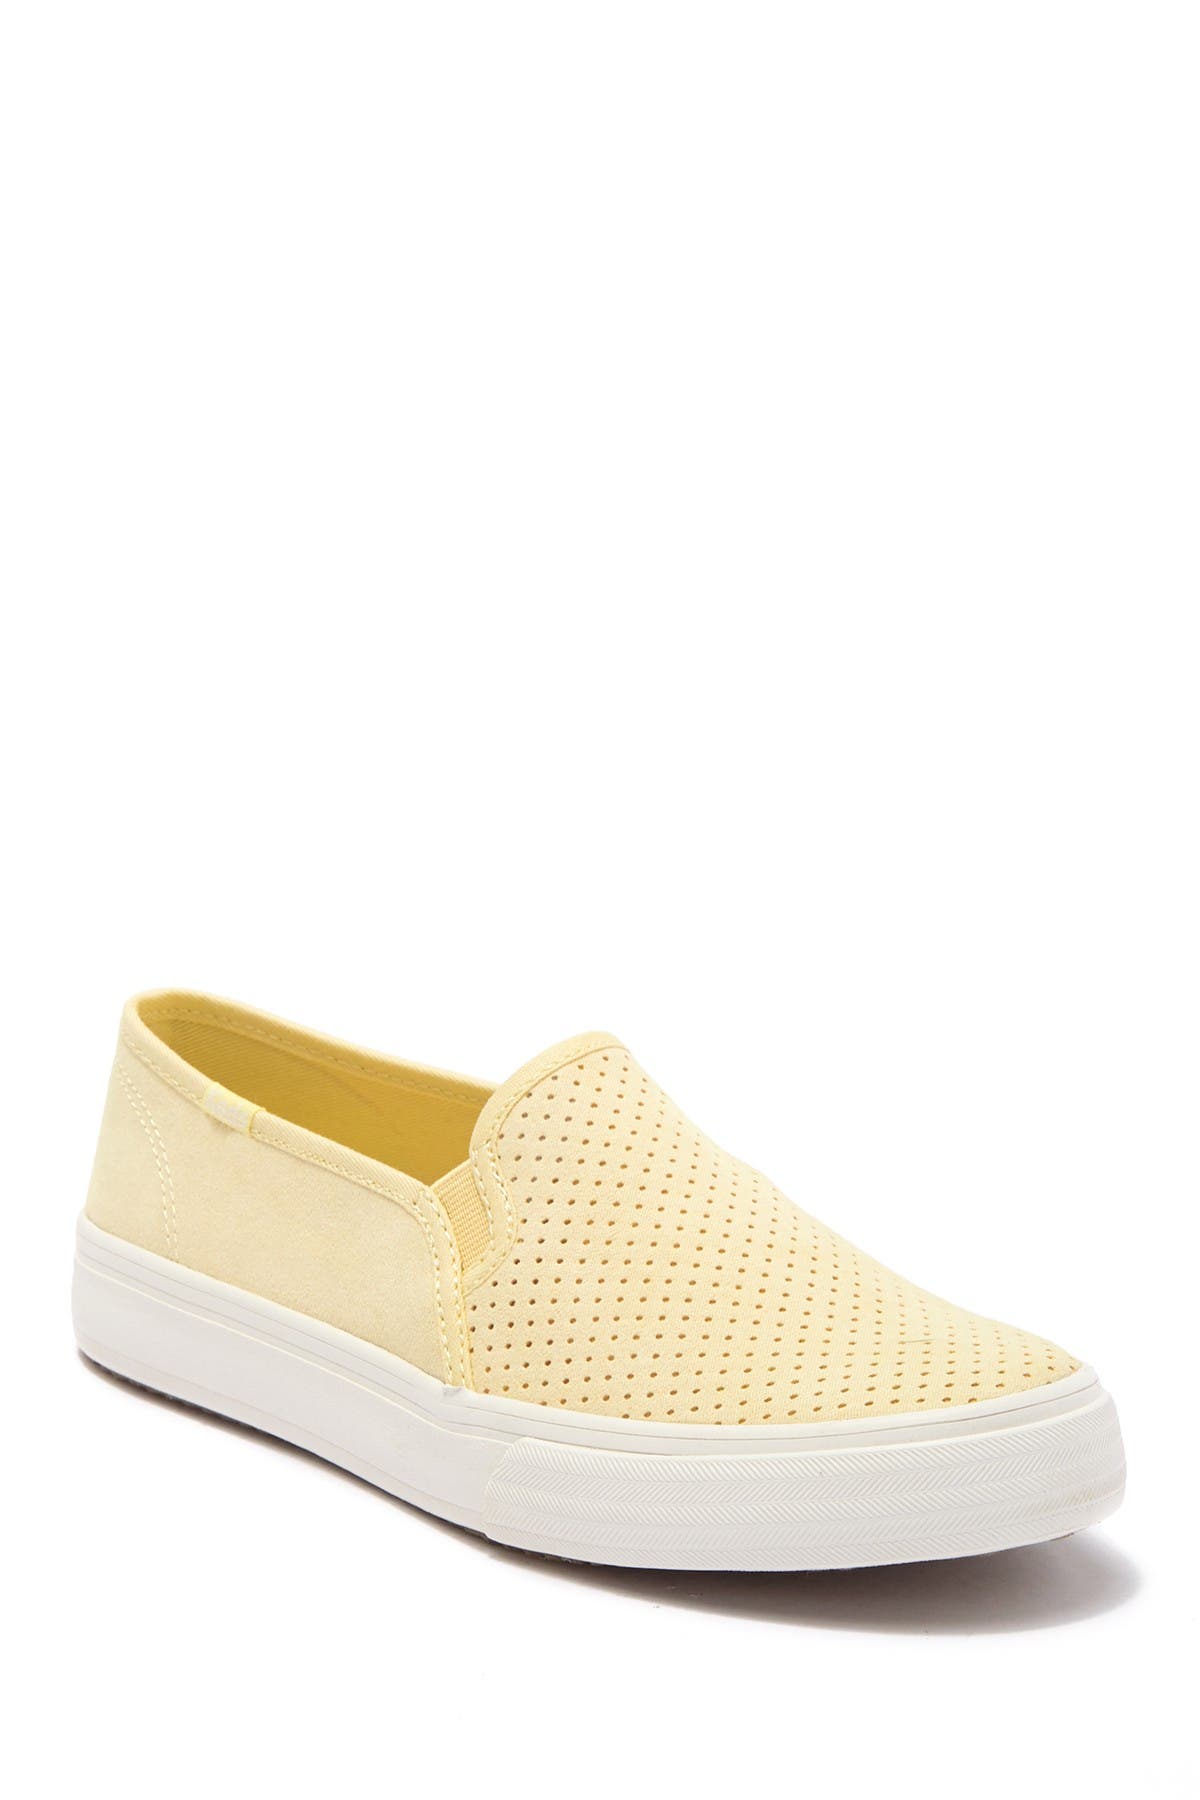 perforated keds